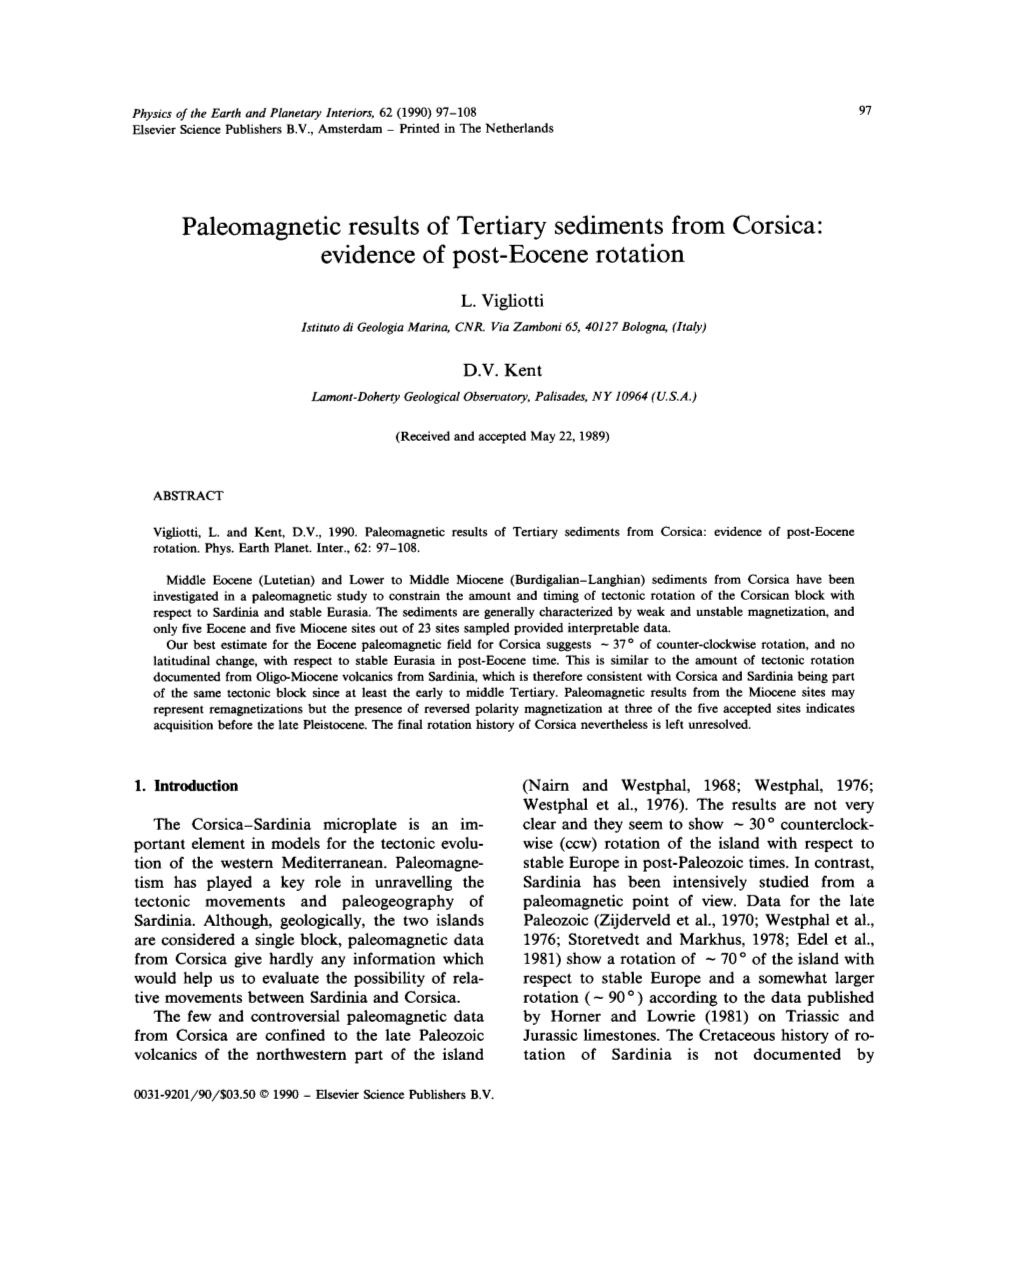 Paleomagnetic Results of Tertiary Sediments from Corsica: Evidence of Post-Eocene Rotation